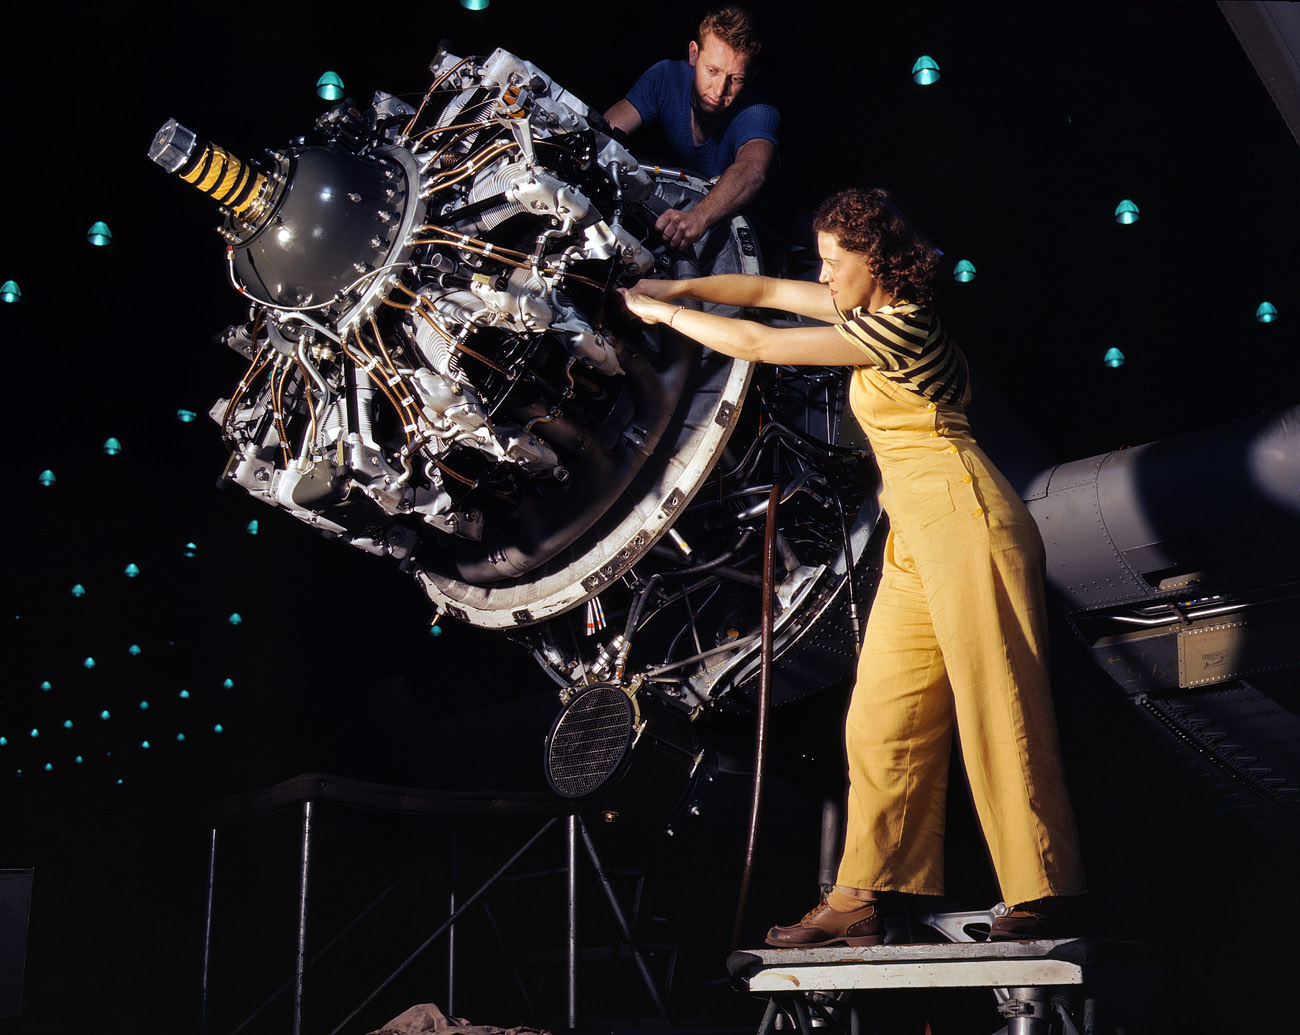 October 1942. Long Beach, California. "Women are trained to do precise and vital engine installation detail in Douglas Aircraft Co. plants." View full size. 4x5 Kodachrome transparency by Alfred Palmer for the Office of War Information.